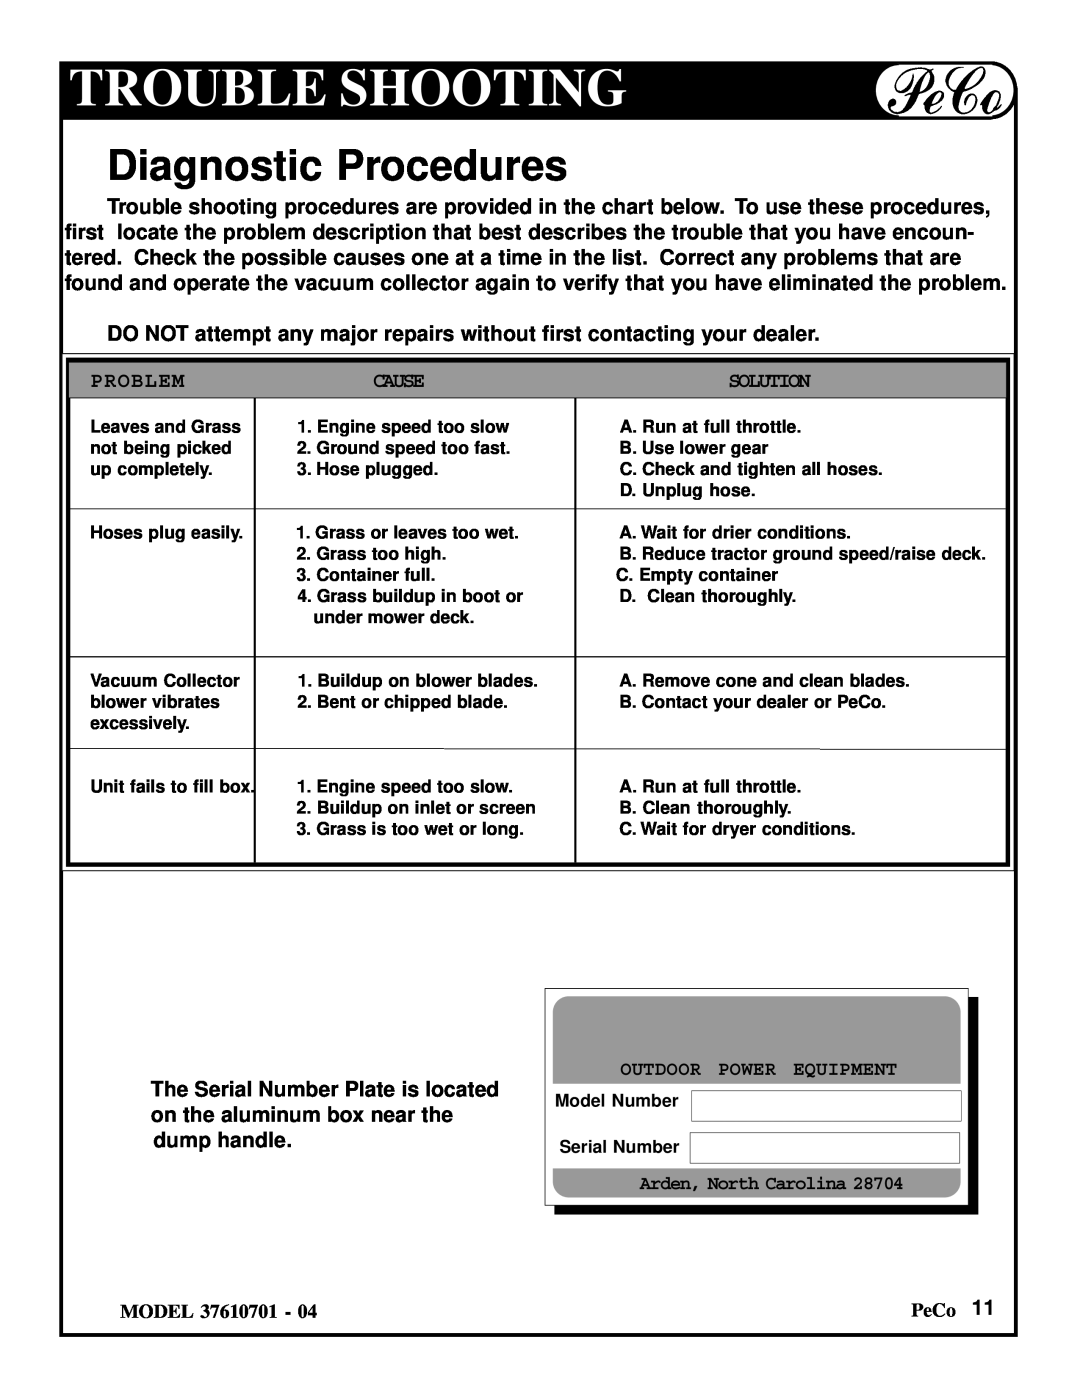 Briggs & Stratton 37610701 - 04 owner manual Trouble Shooting, Diagnostic Procedures, Problem, Cause, Solution 